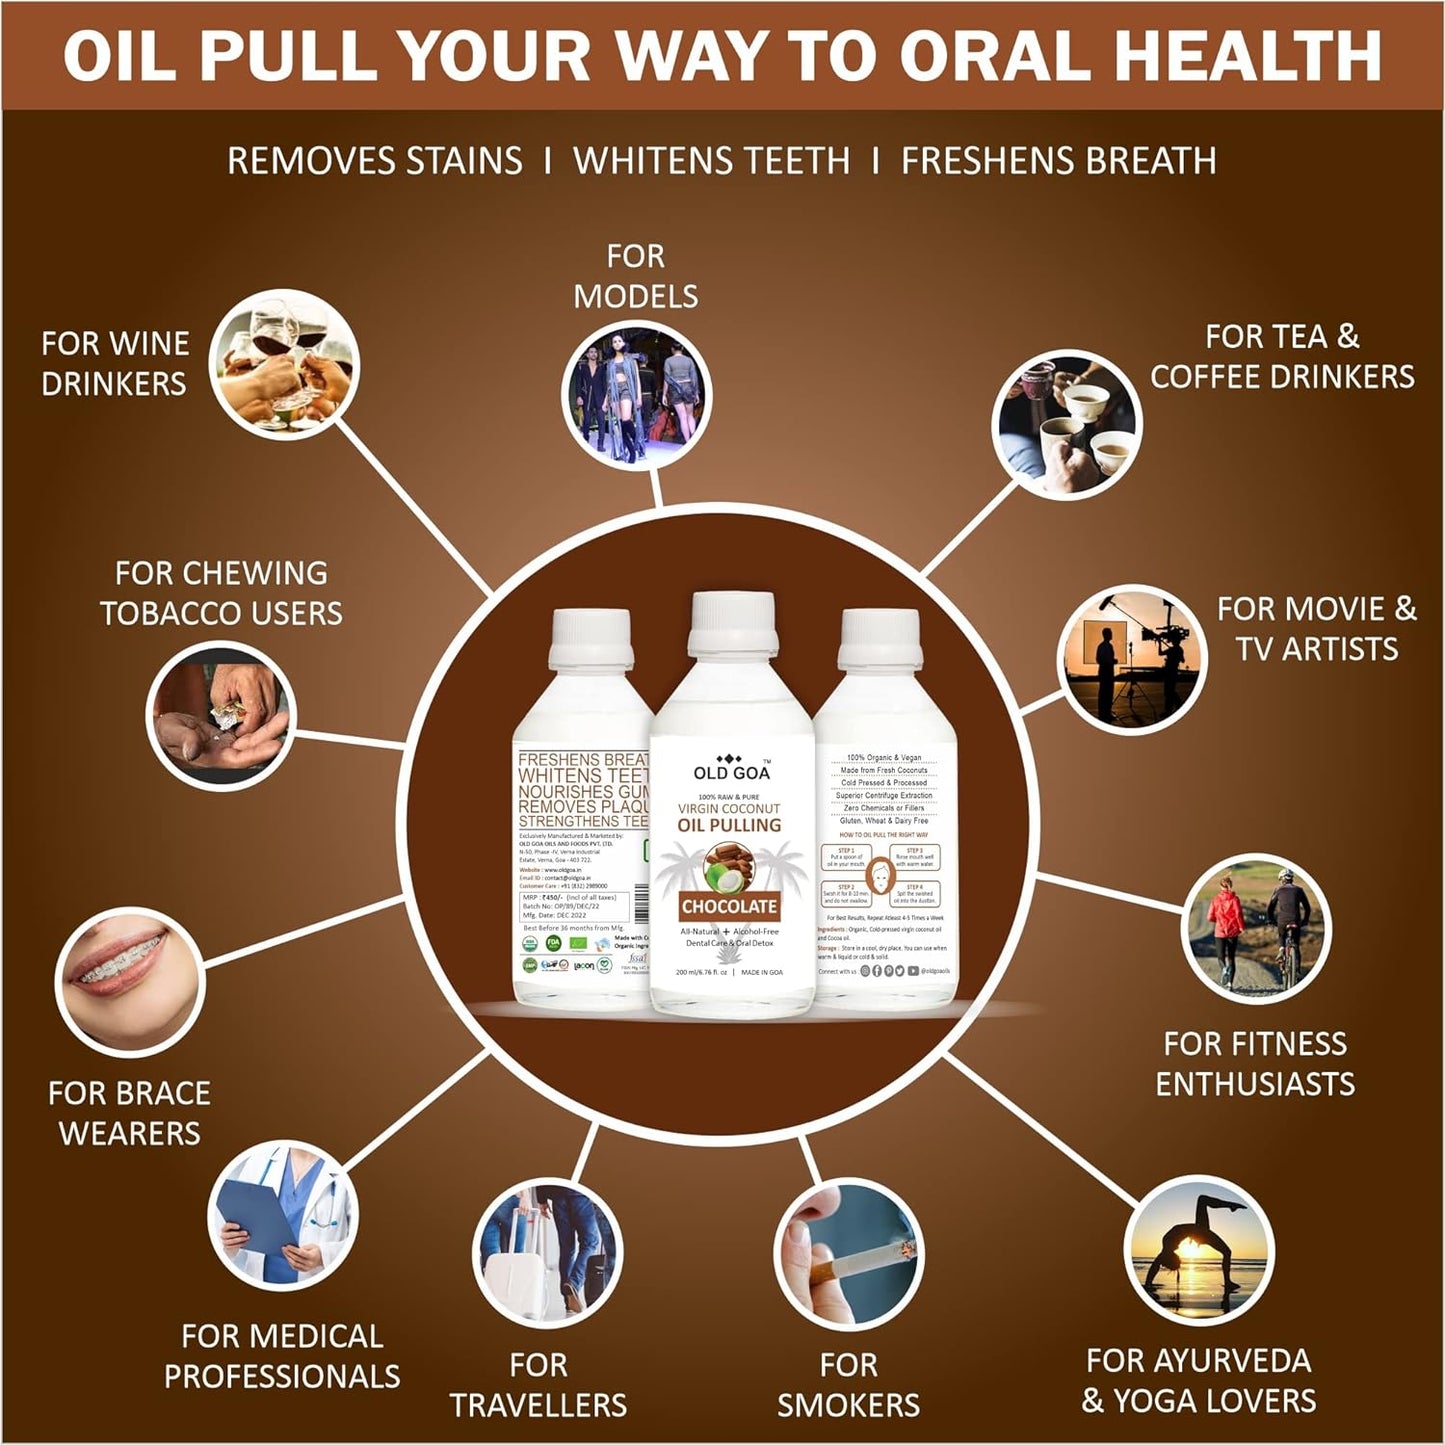 Oil Pulling Chocolate